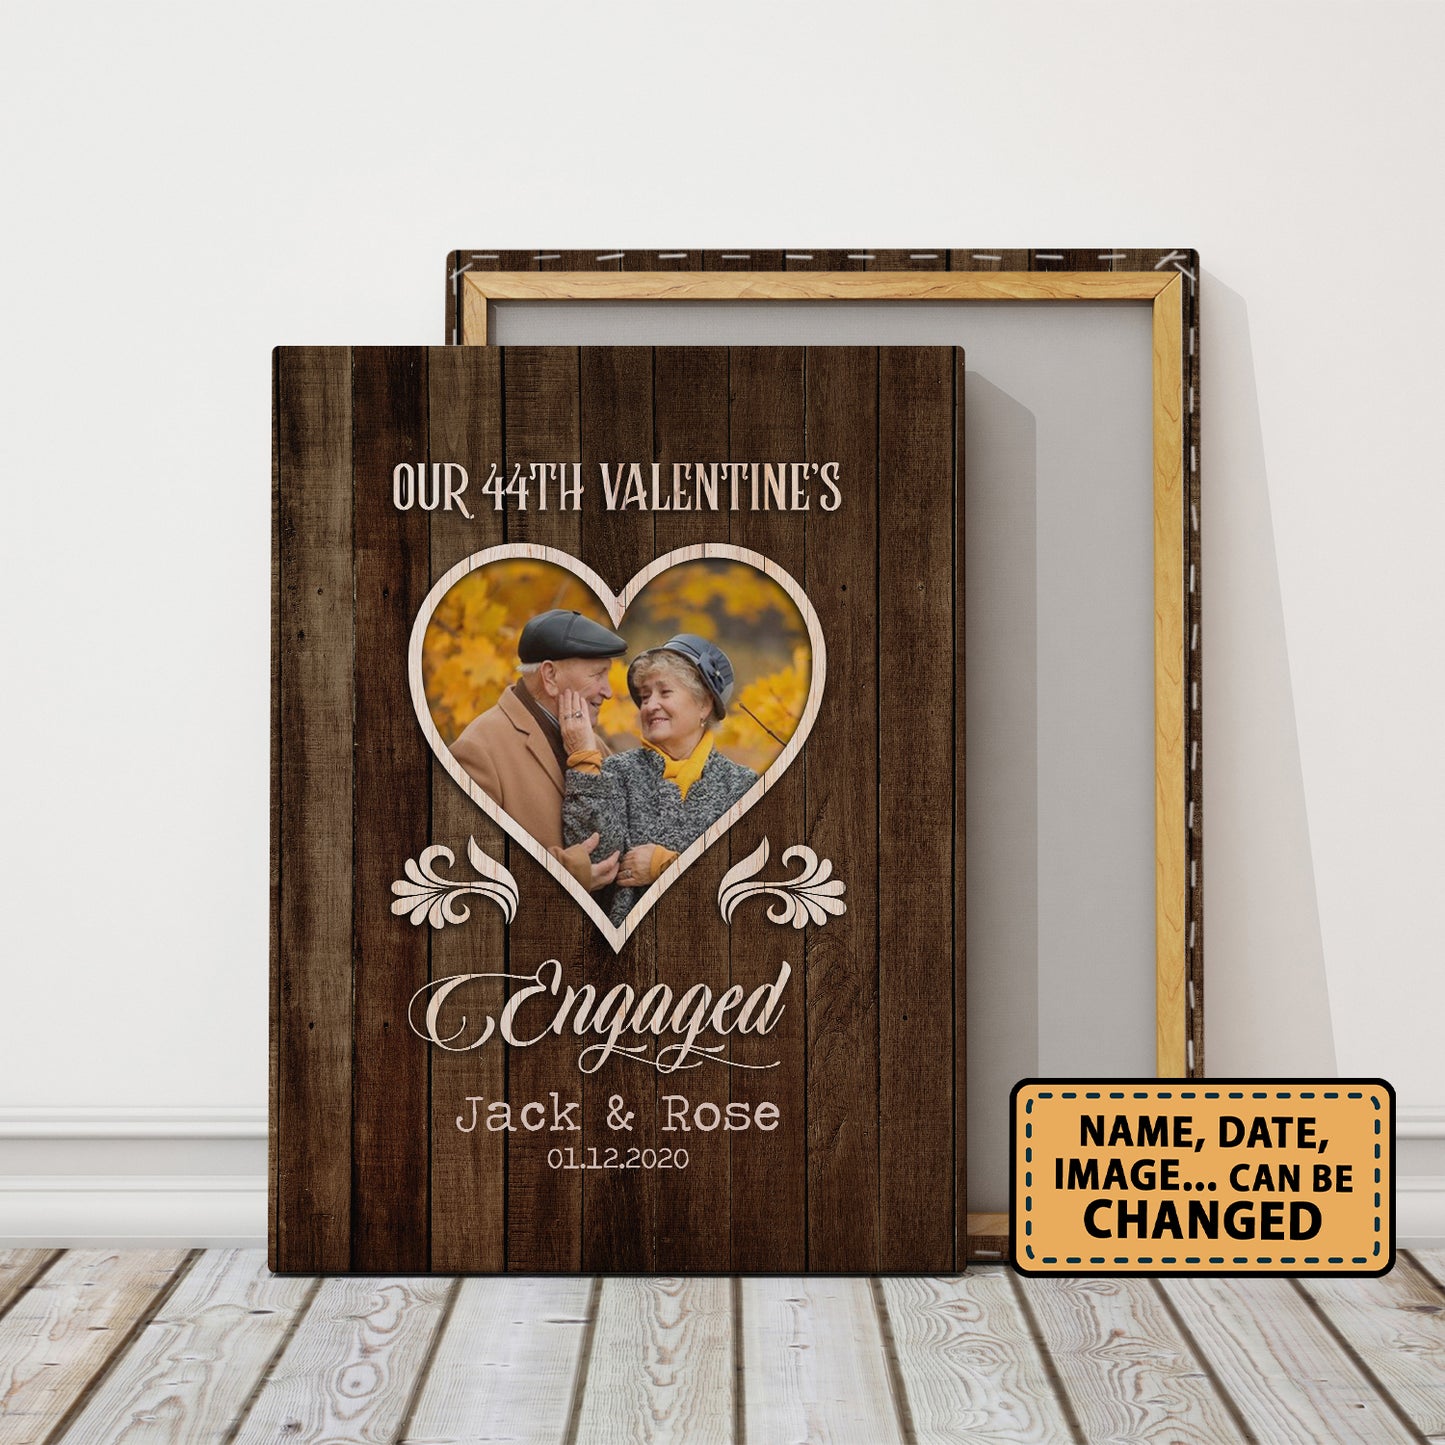 Our 44th Valentine’s Day Engaged Custom Image Anniversary Canvas